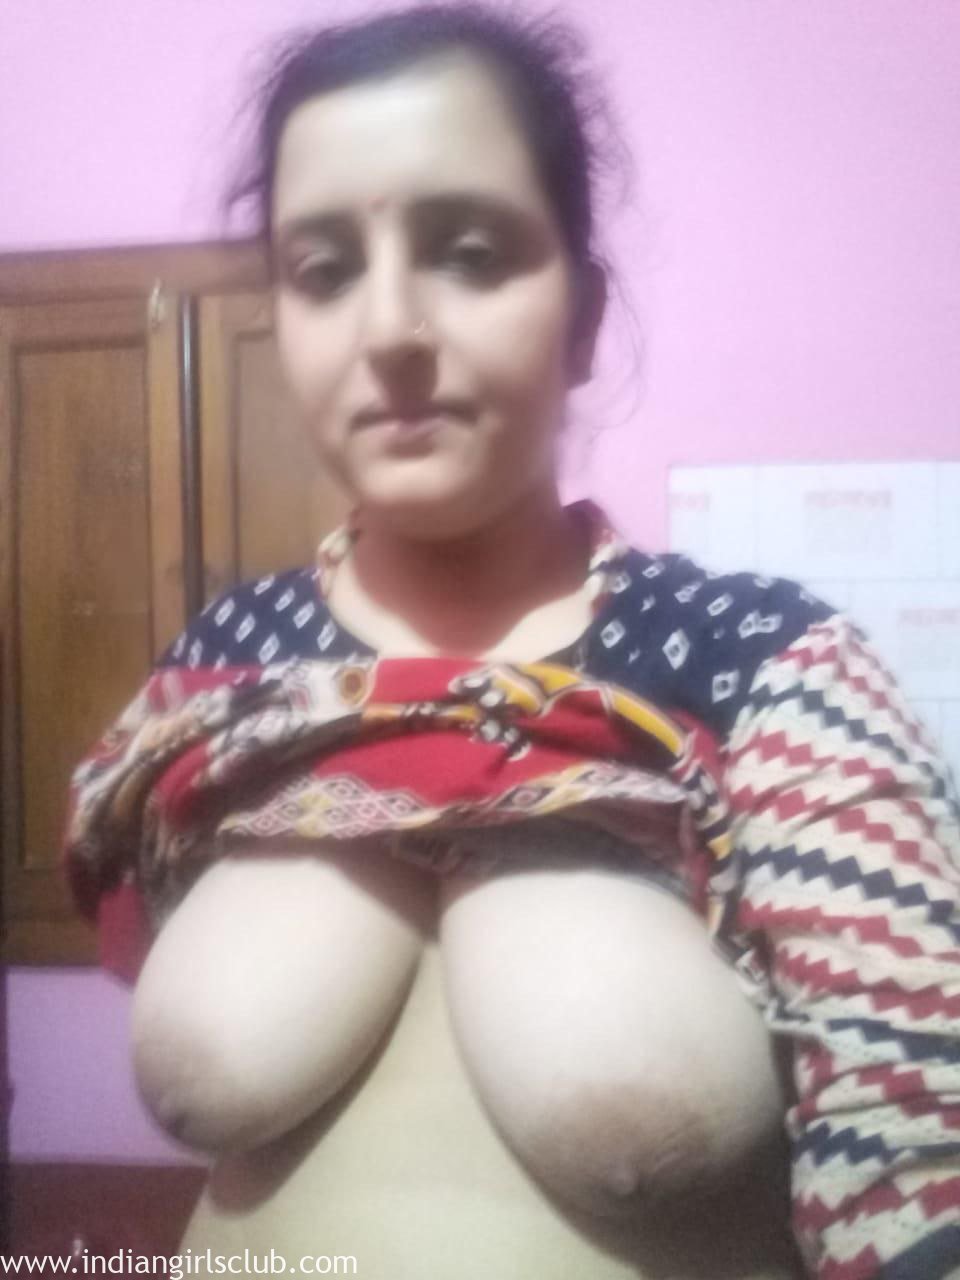 big-tits-bengali-indian-housewife-ready-for-hot-sex-17 - Indian Girls Club  photo